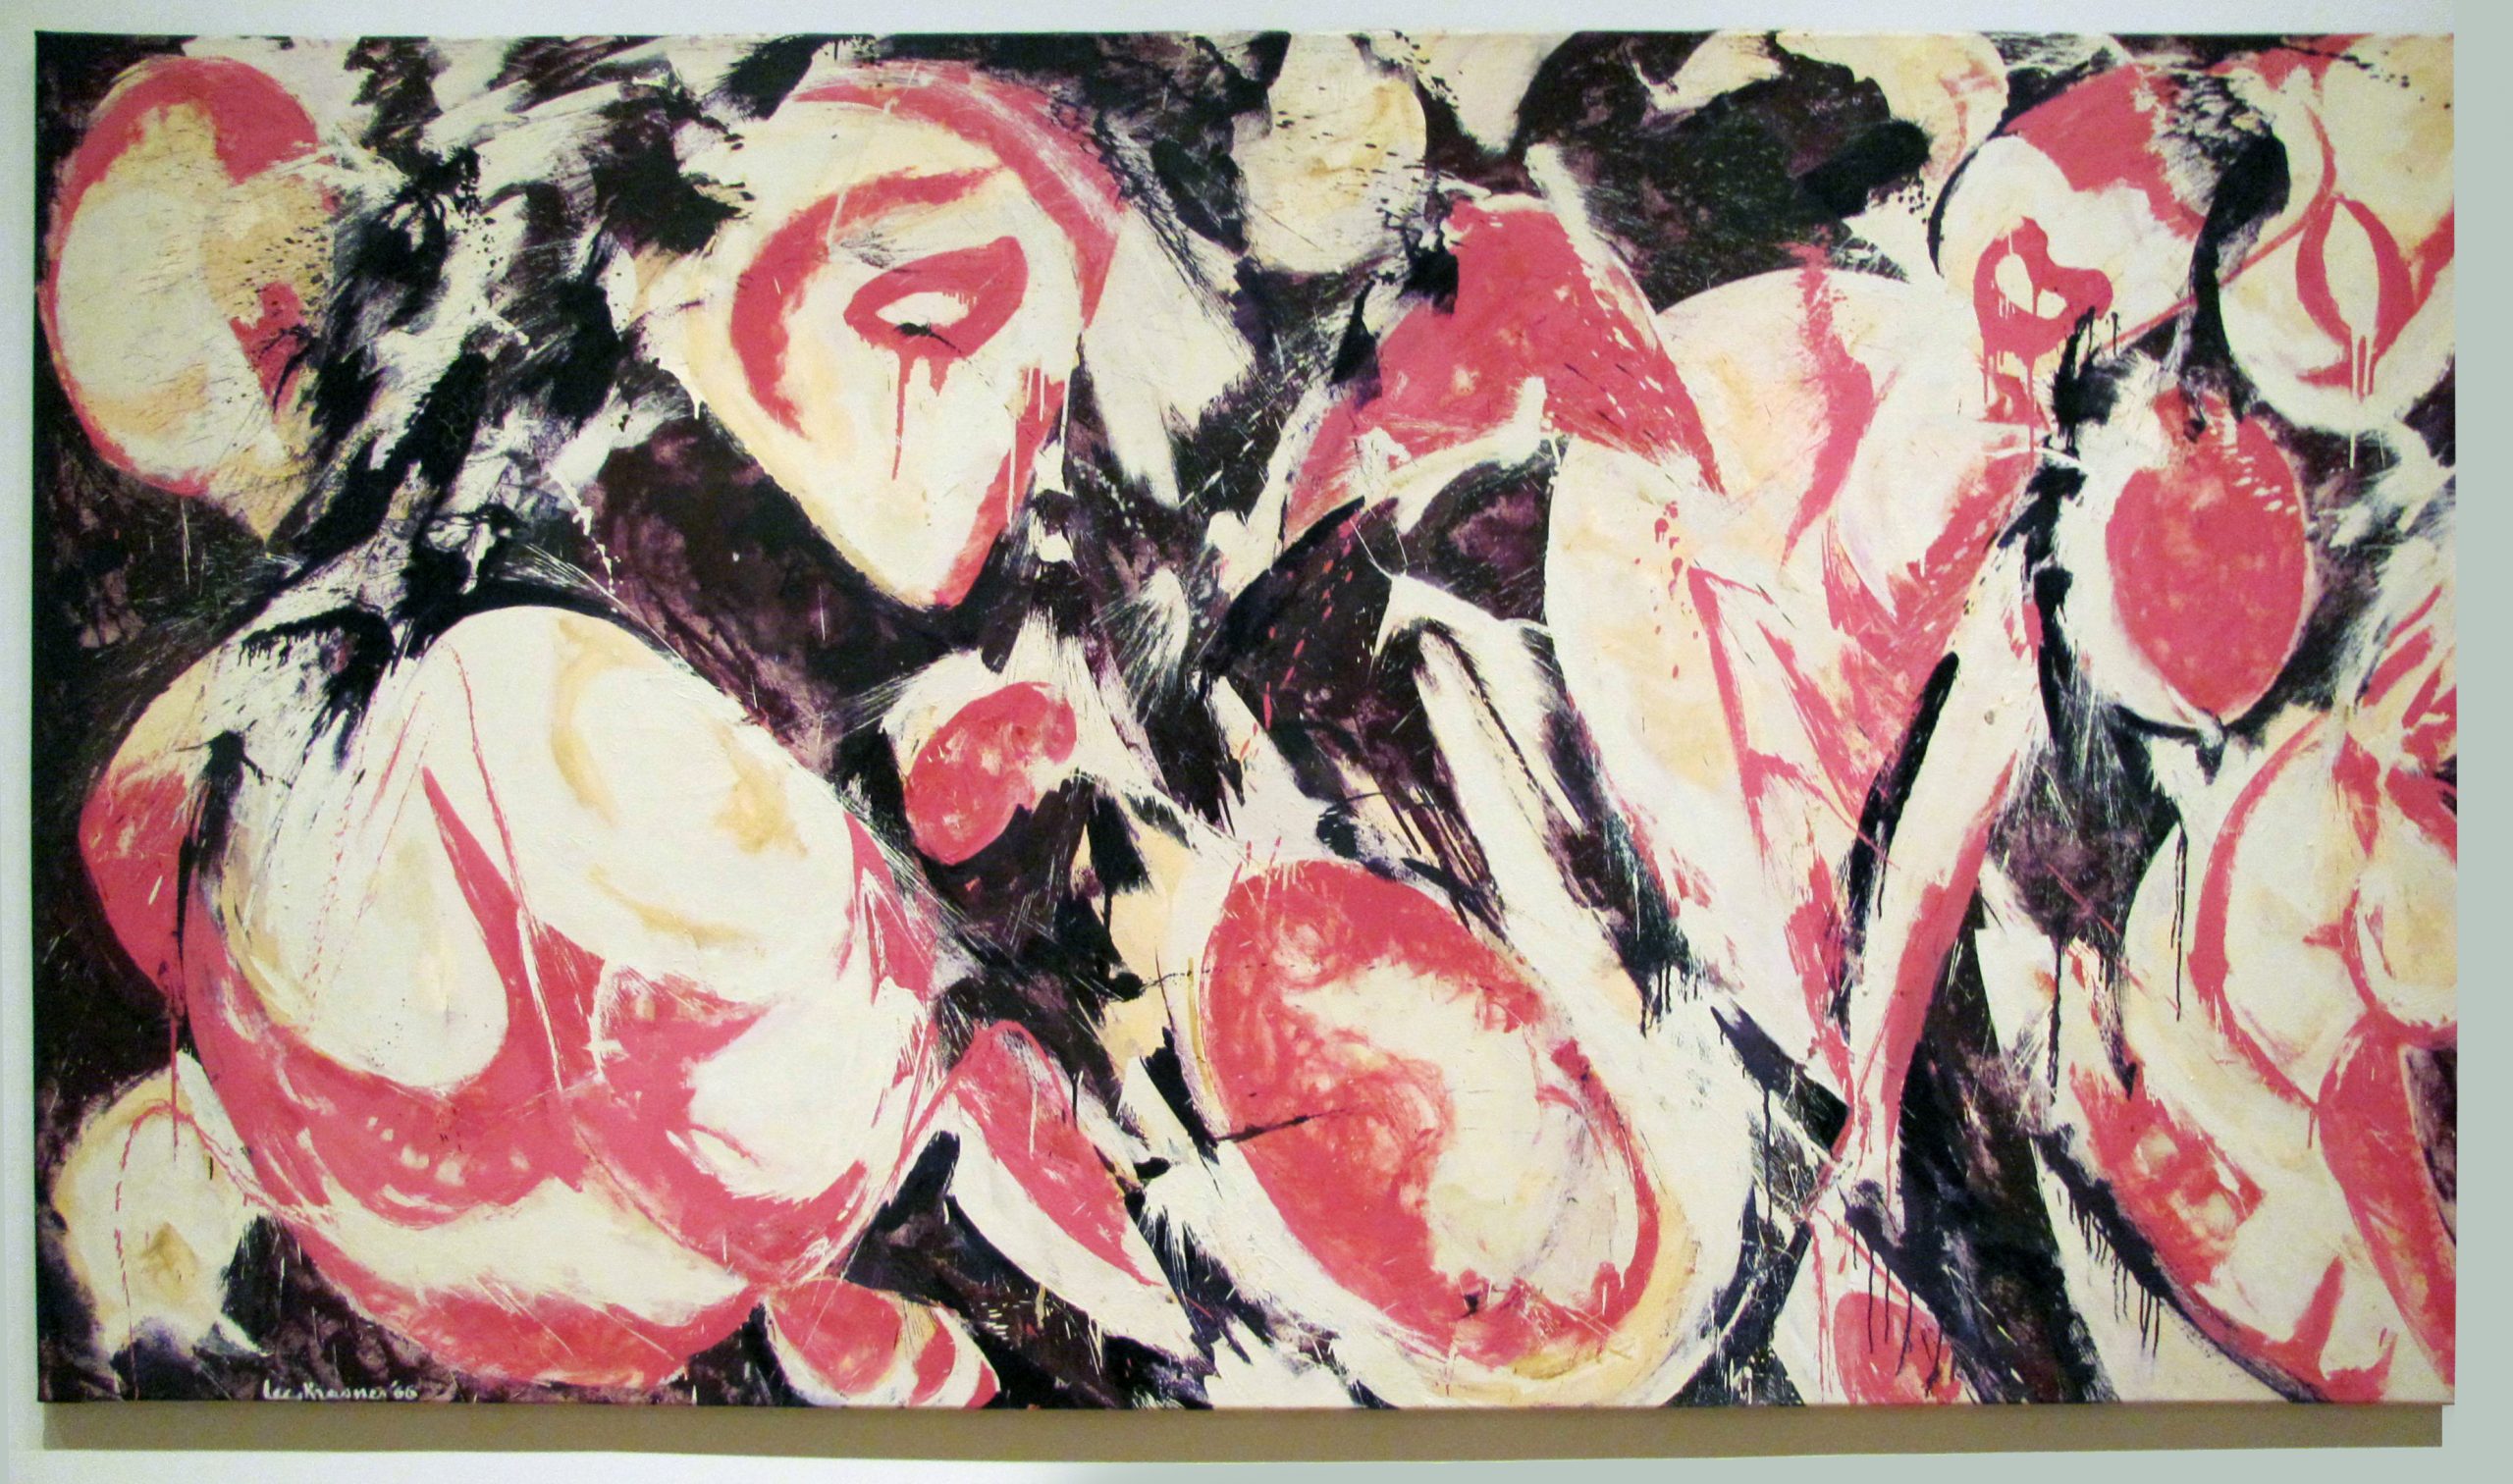 Abstract painting with roughly circular or oval shapes of red and white and black paint in between them.